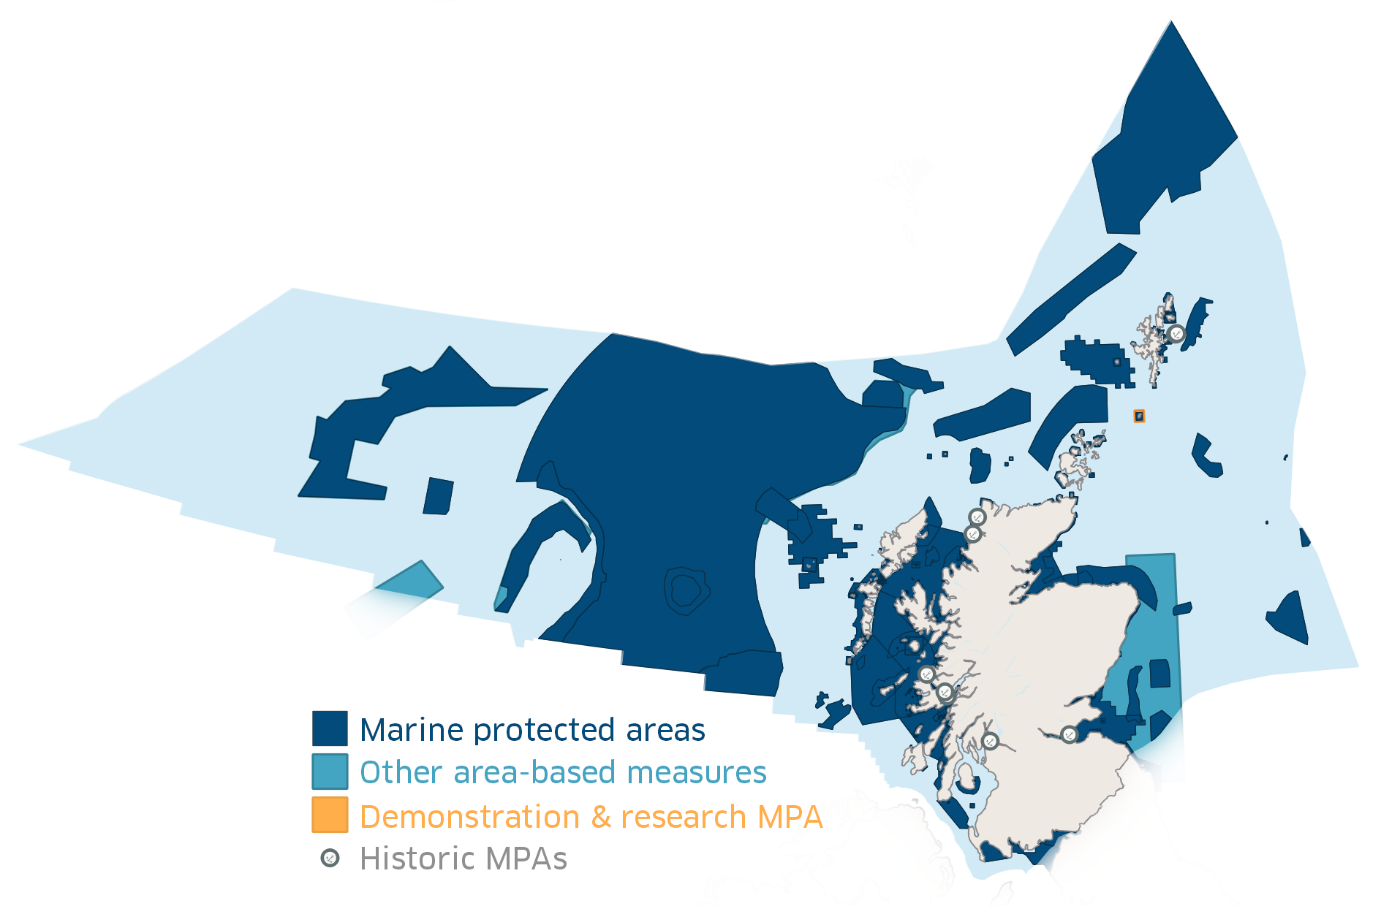 Scotland’s marine protected areas now cover 37% of Scotland’s seas.